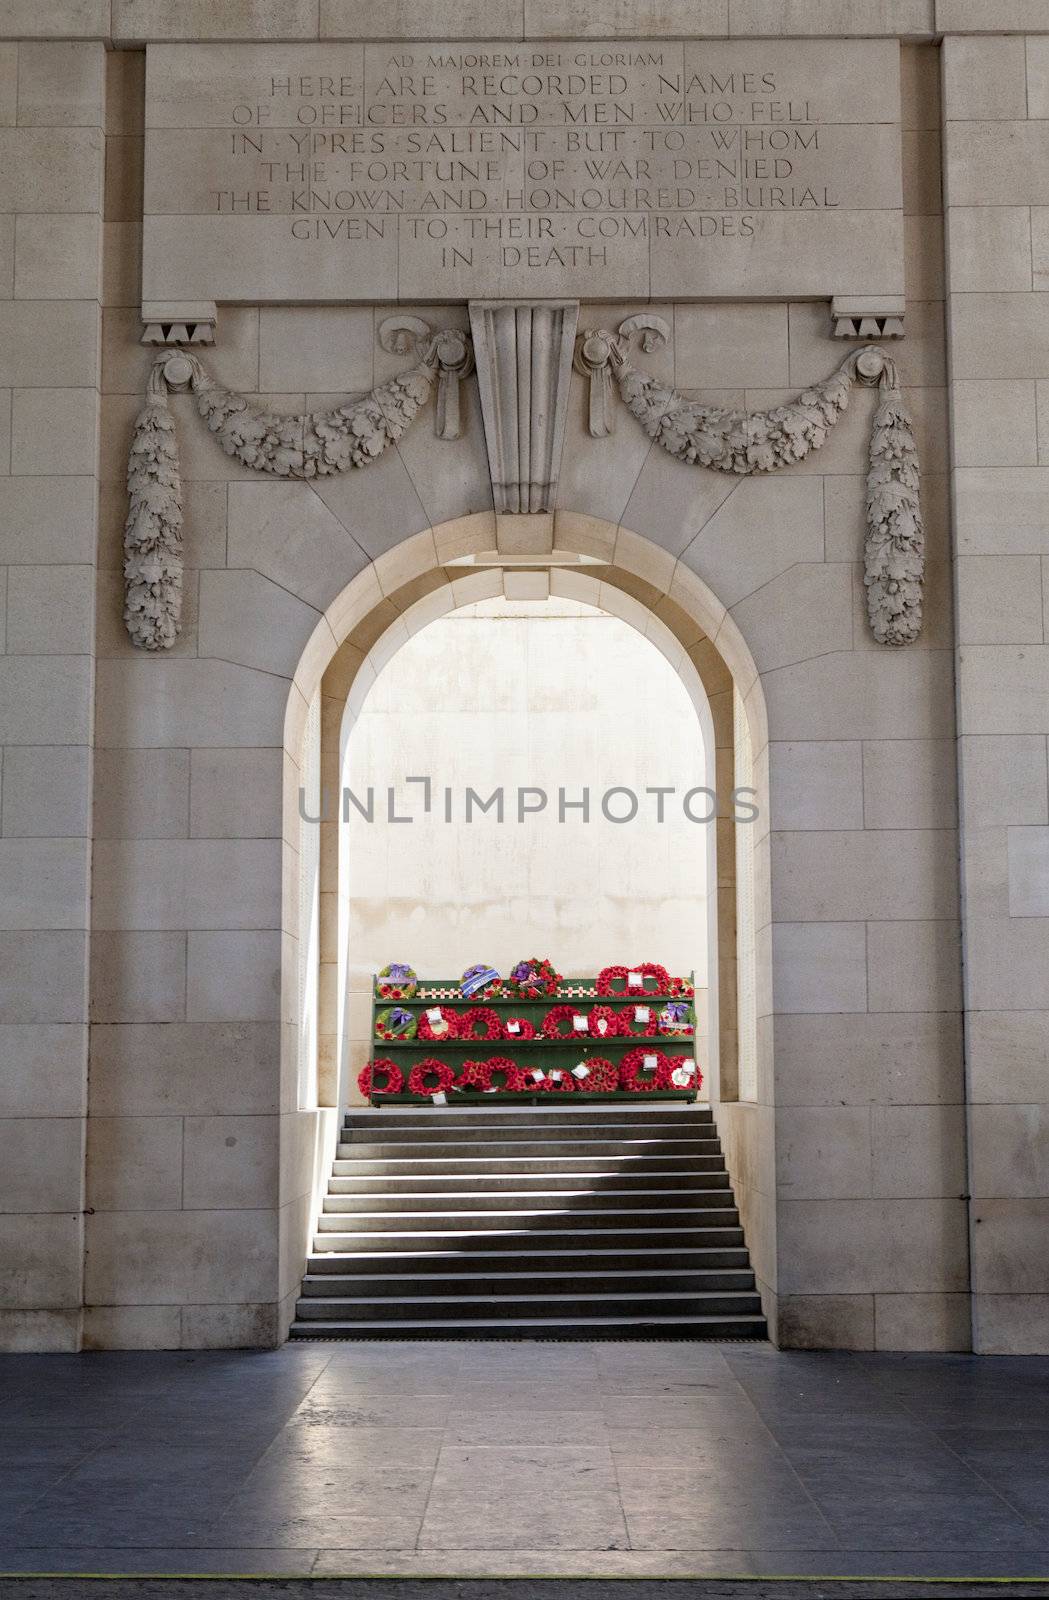 Inside the Menin Gate in Ypres, Belgium.  The gate is dedicated to the British and Commonwealth soldiers who were killed in the Ypres Salient of World War I and whose graves are unknown.